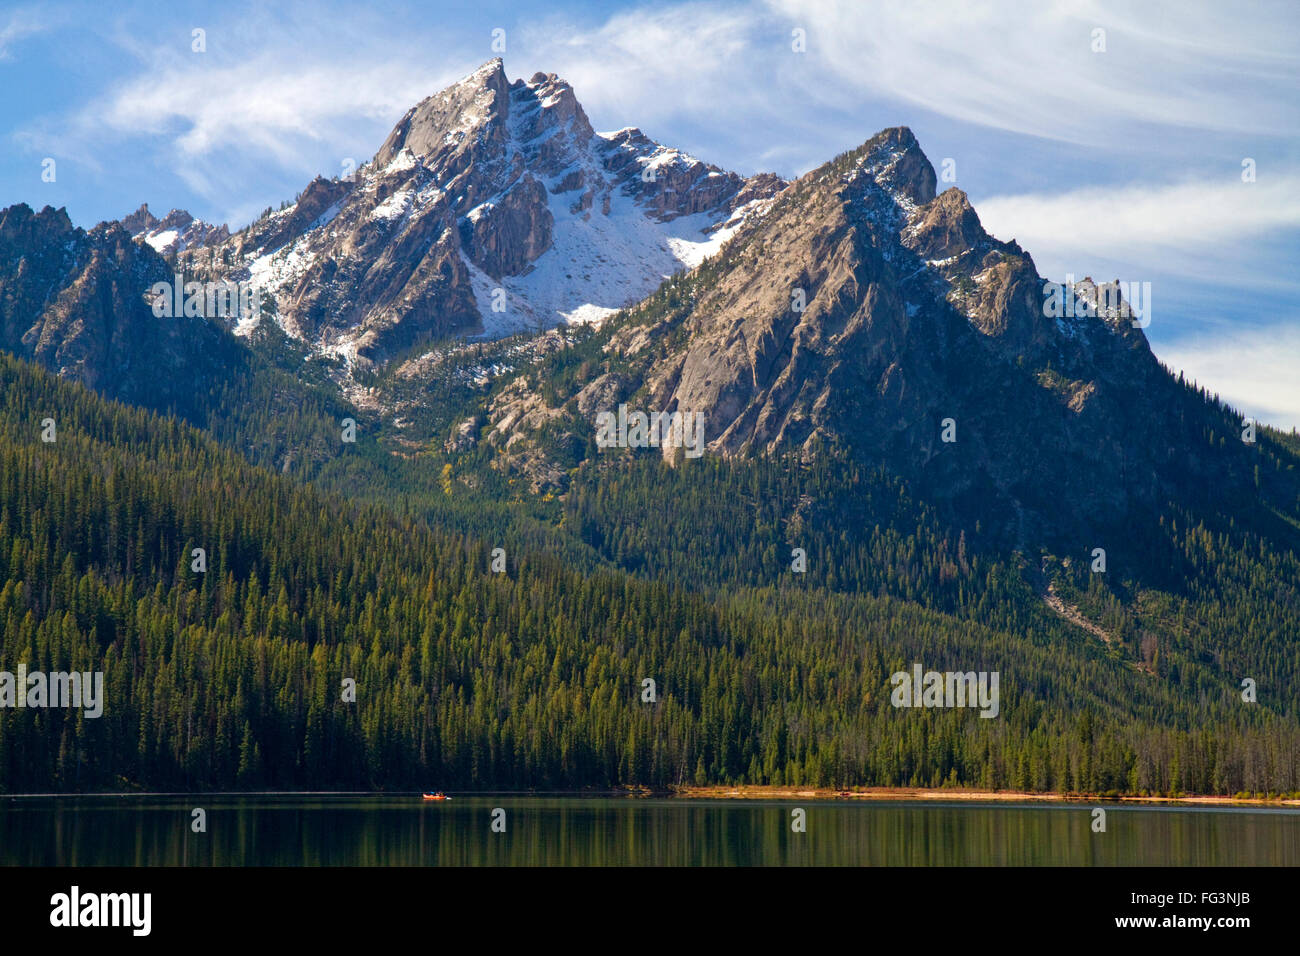 Stanley Lake at the base of McGown Peak in the Sawtooth Mountains near Stanley, Idaho, USA. Stock Photo